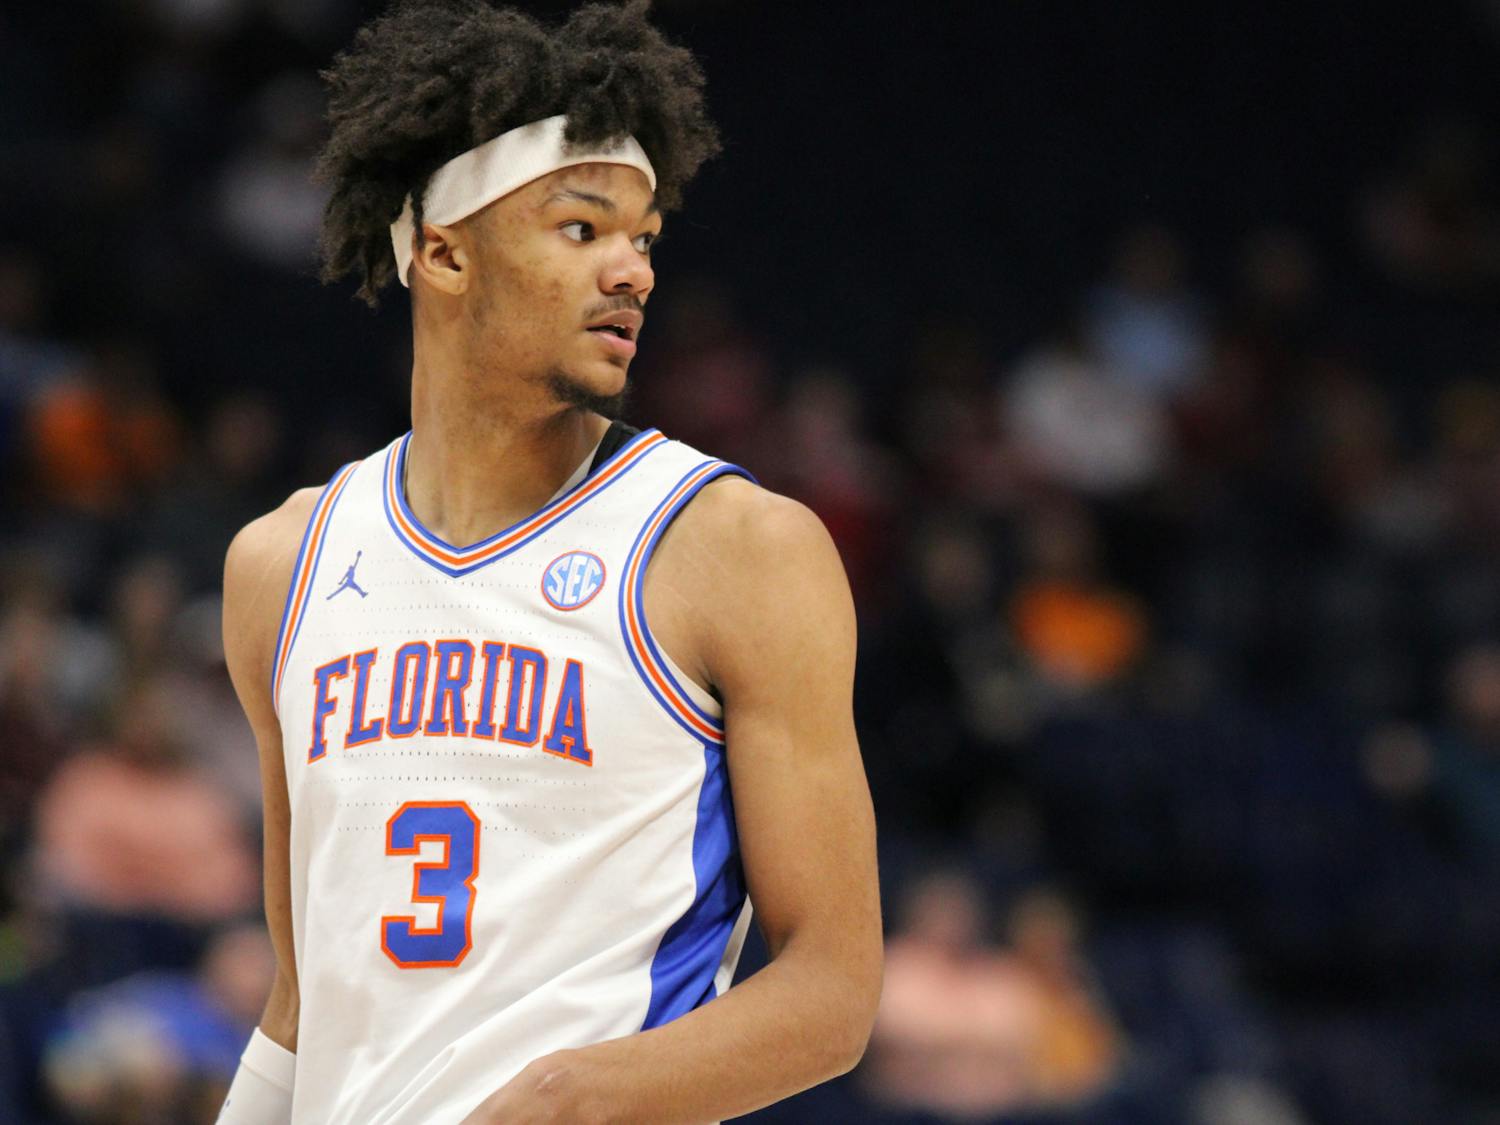 Florida forward Alex fudge stands on the court during the Gators' 69-68 loss to the Mississippi State Bulldogs in the second round of the Southeastern Conference Tournament Thursday, March 9, 2023.